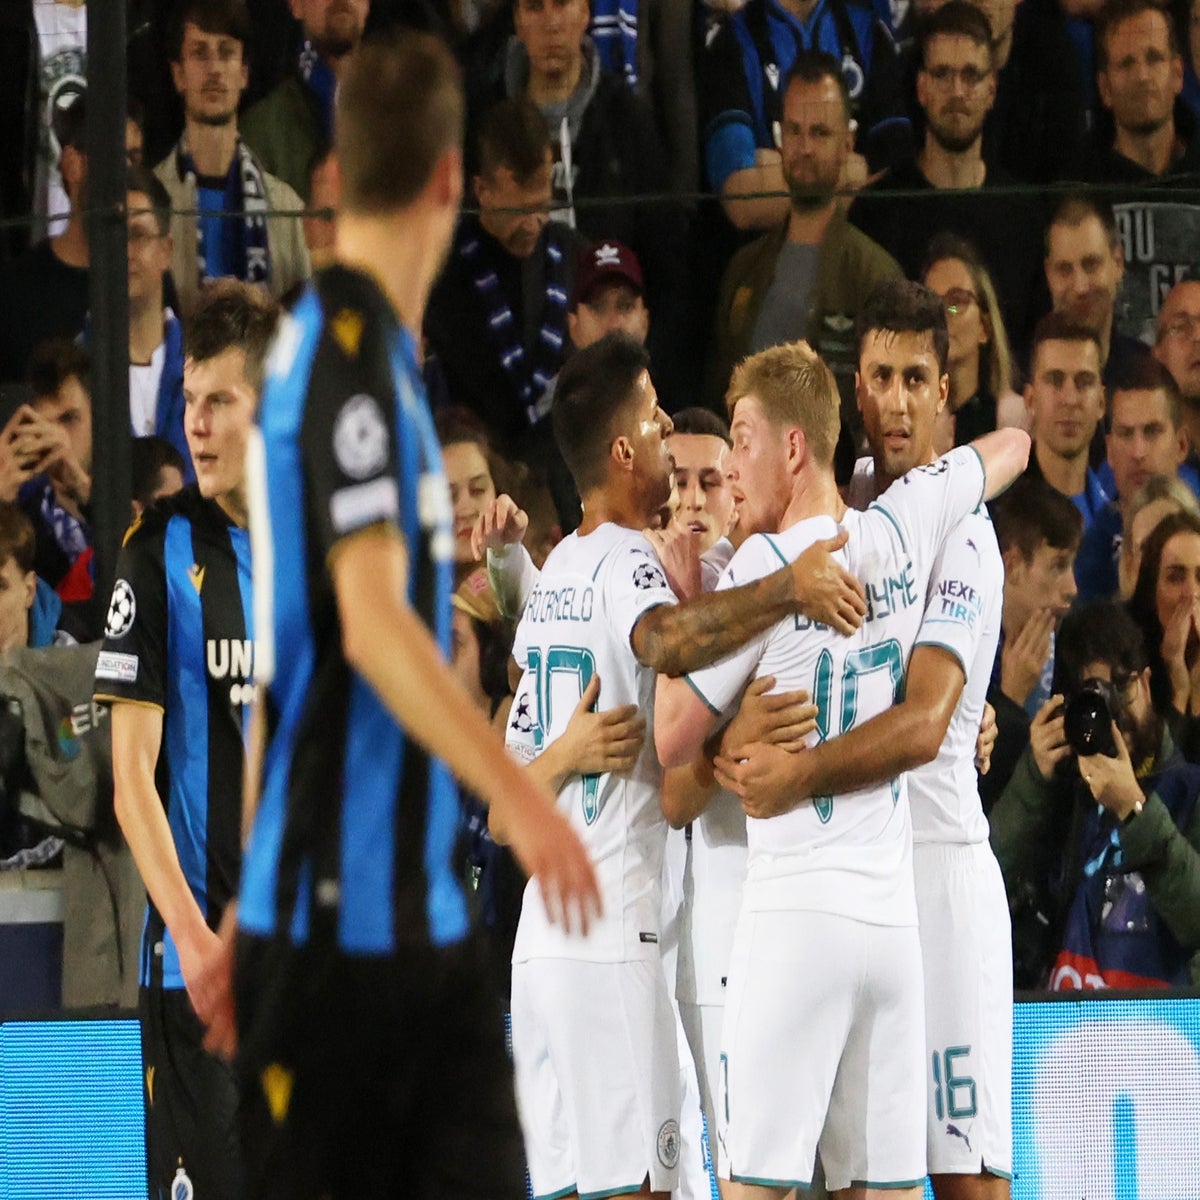 Man City 4-1 Club Brugge: Player ratings - Champions League